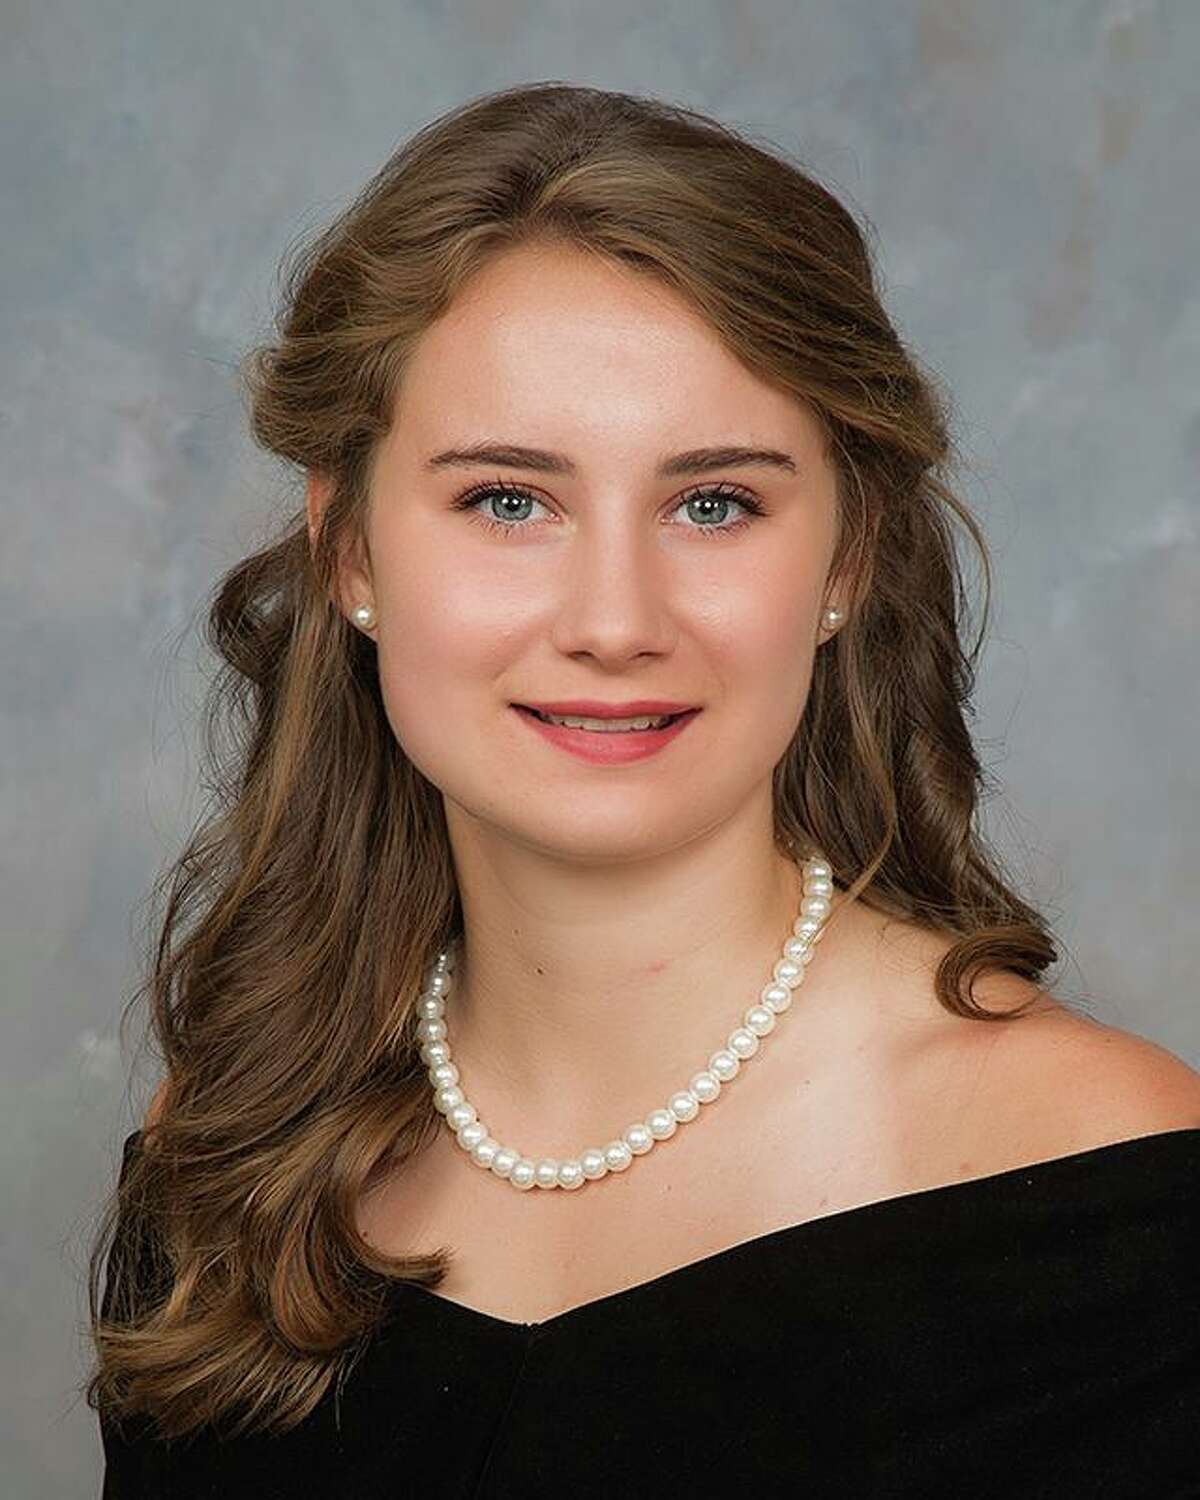 Bailee CoVan is the valedictorian for the Class of 2020 at Crosby High School.